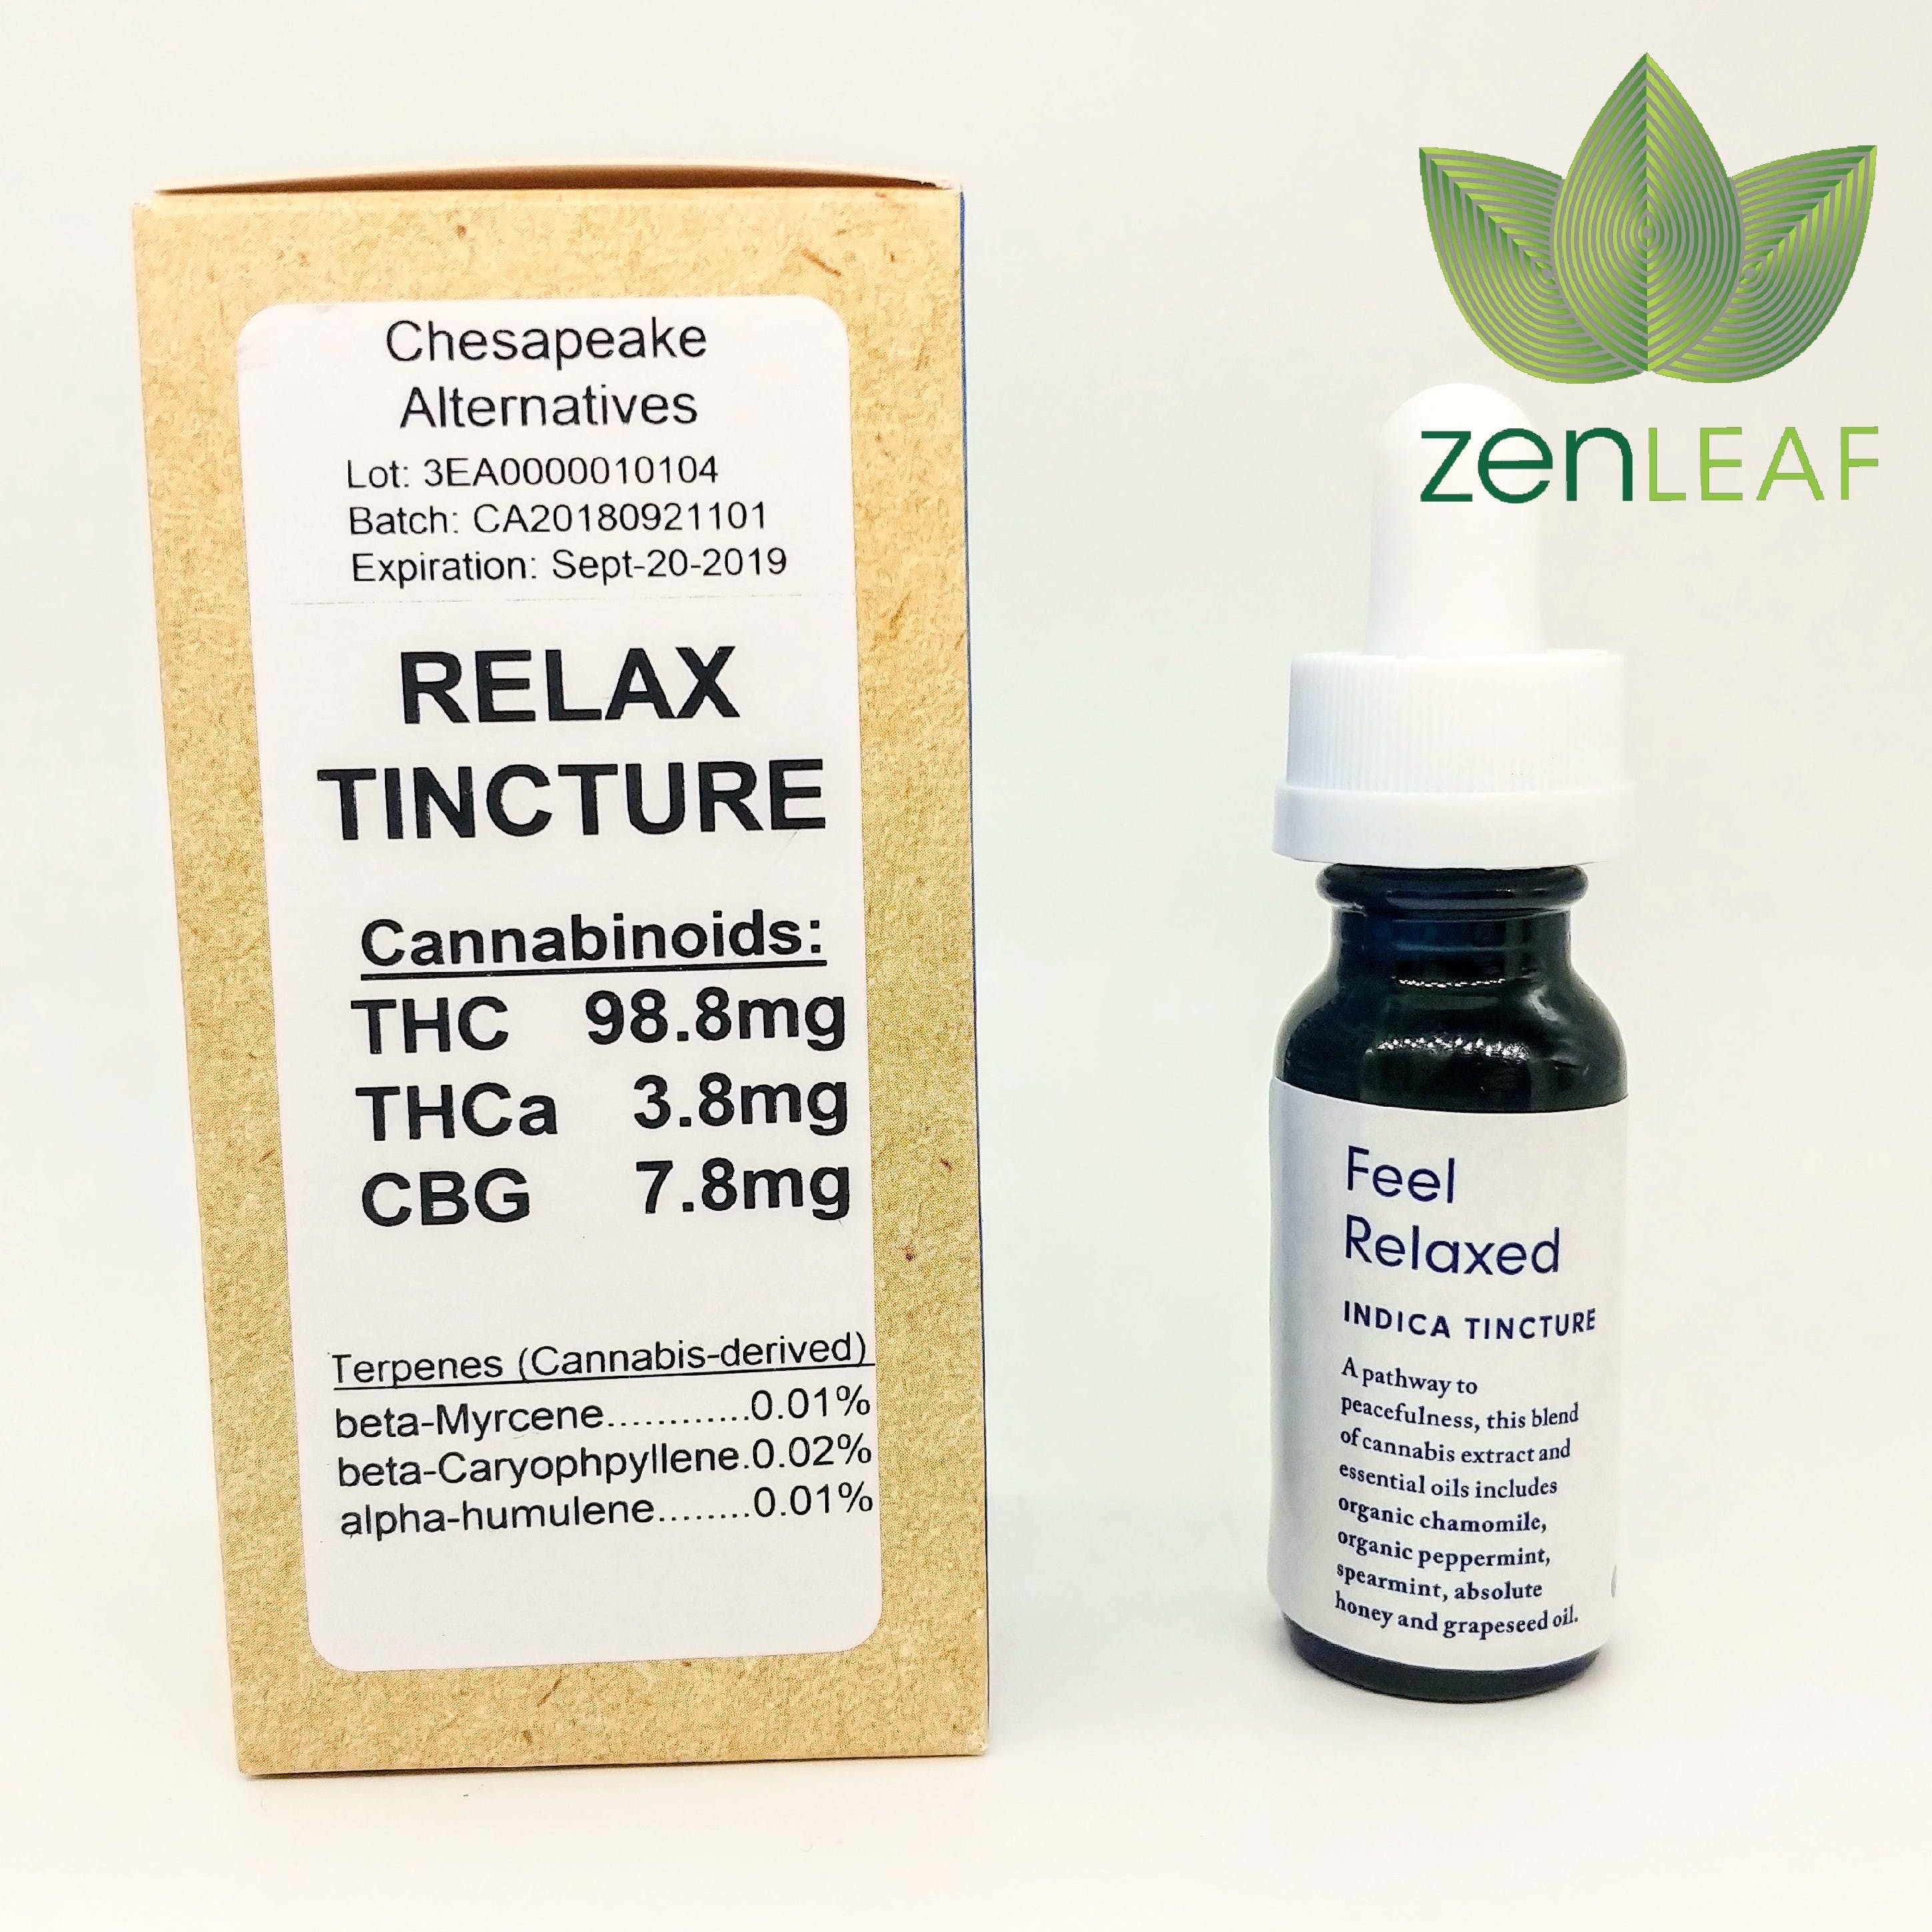 Feel Relaxed Indica Tincture